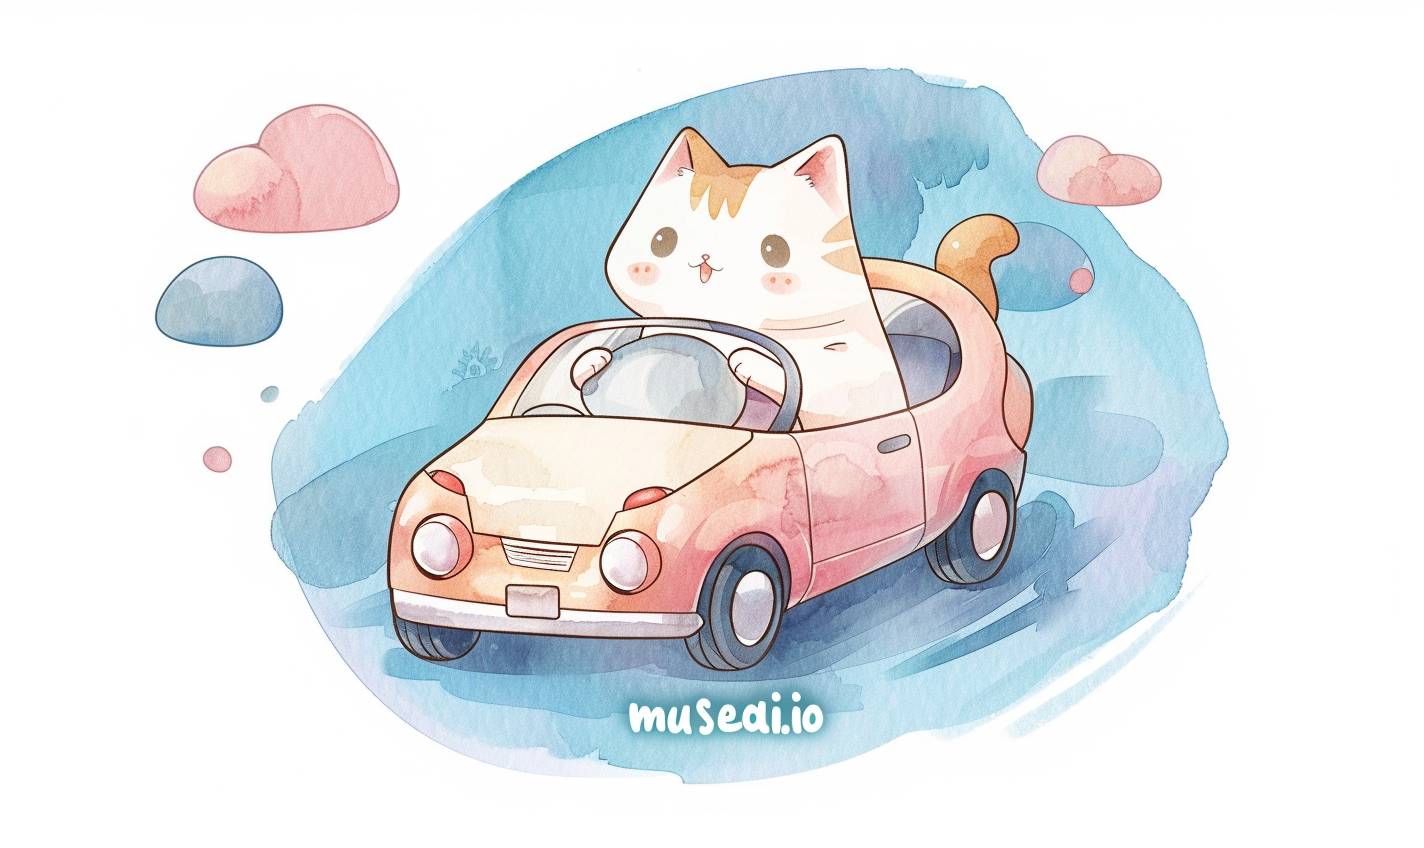 Chubby cat in a tiny car 2D flat illustration t-shirt design with text saying 'musesai.io' in the style of watercolor